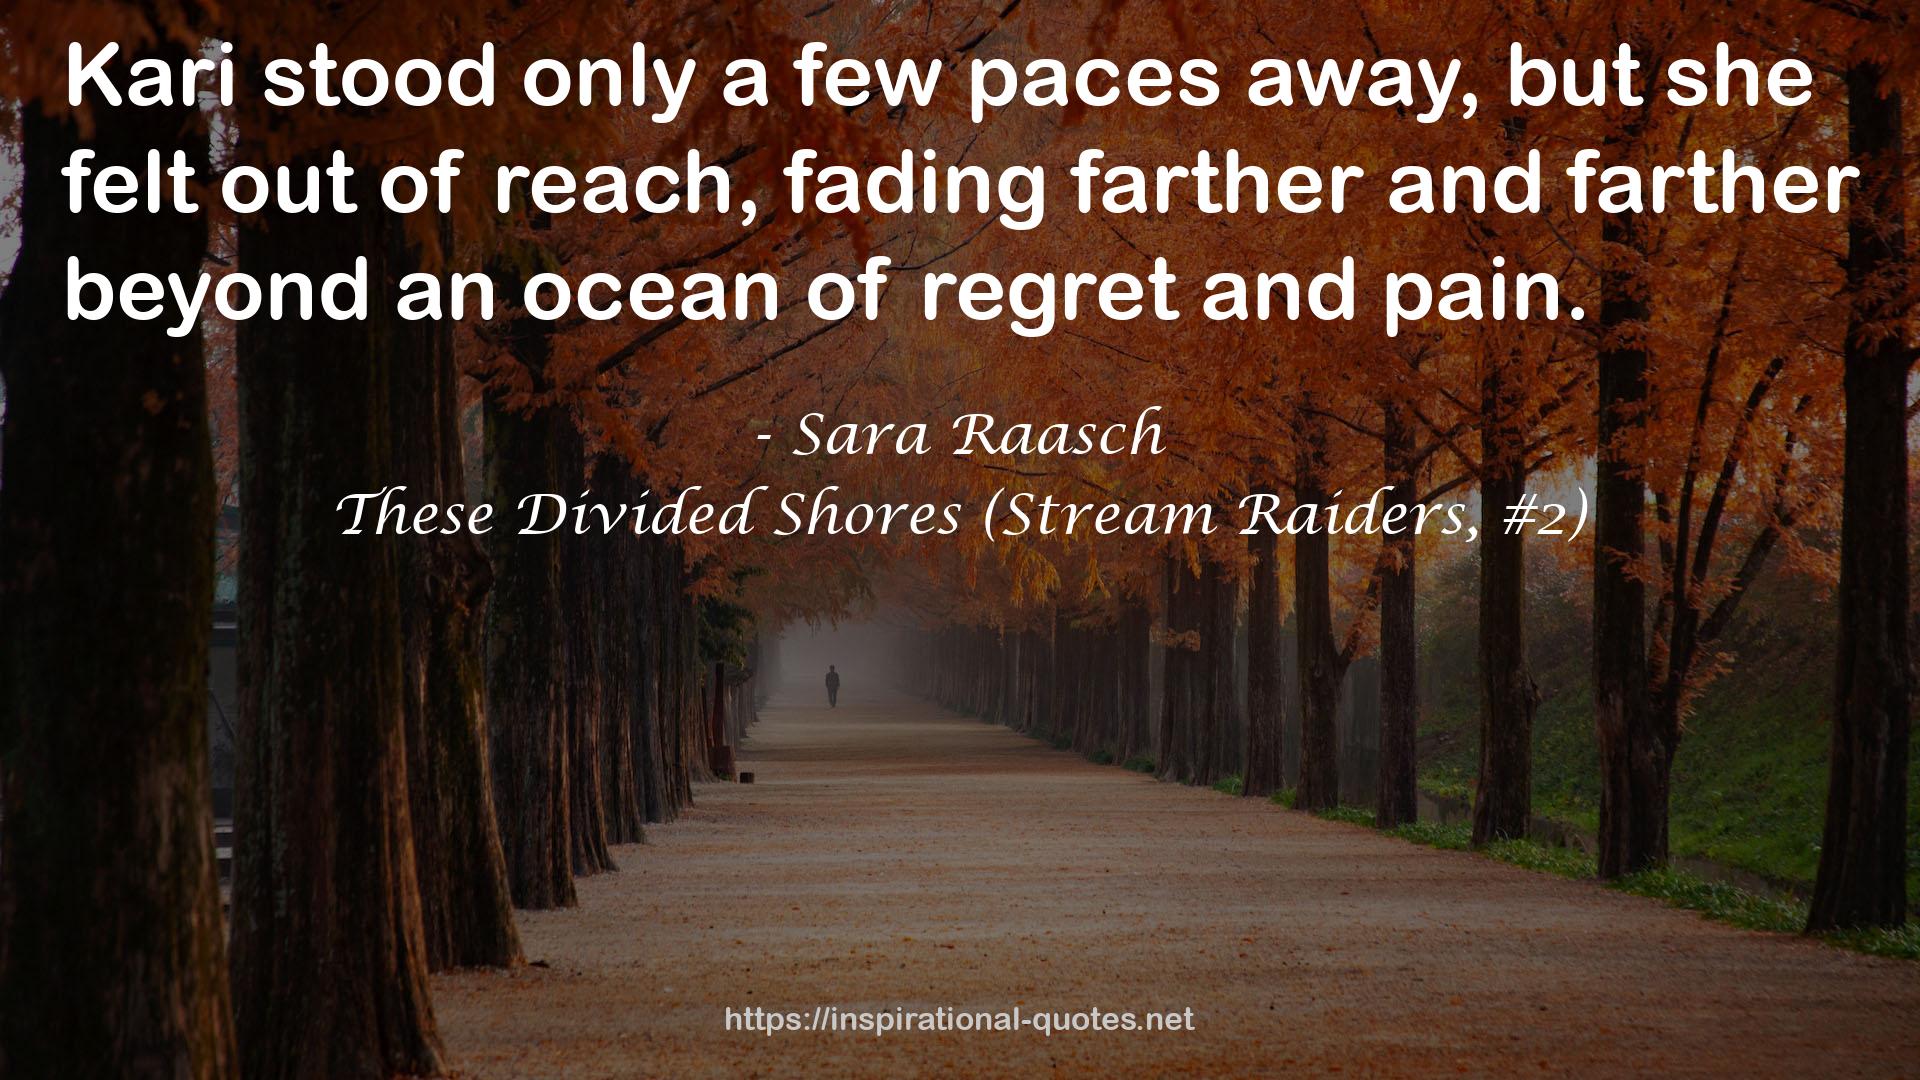 These Divided Shores (Stream Raiders, #2) QUOTES